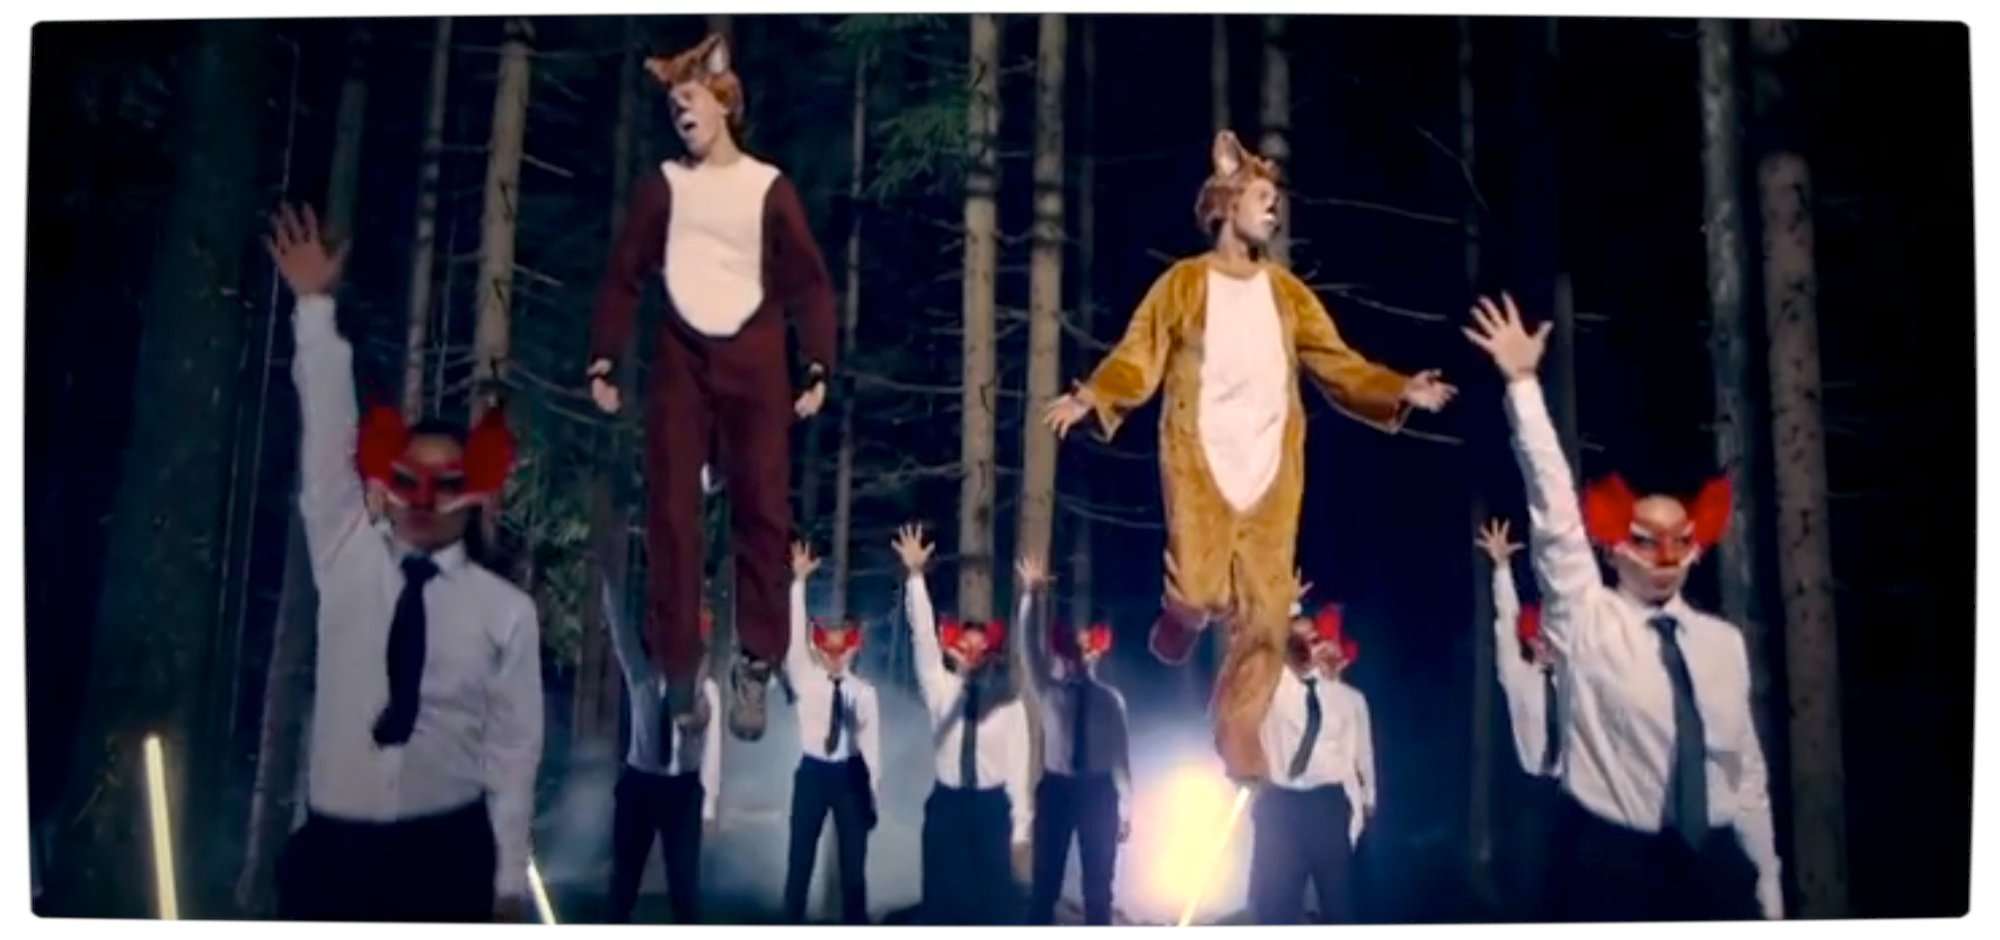 http://www.vamers.com/wp-content/uploads/2013/09/Vamers-FIY-Ermahgerd-What-does-the-Fox-say-Ylvis-has-the-answer-Flying-Foxes.jpg